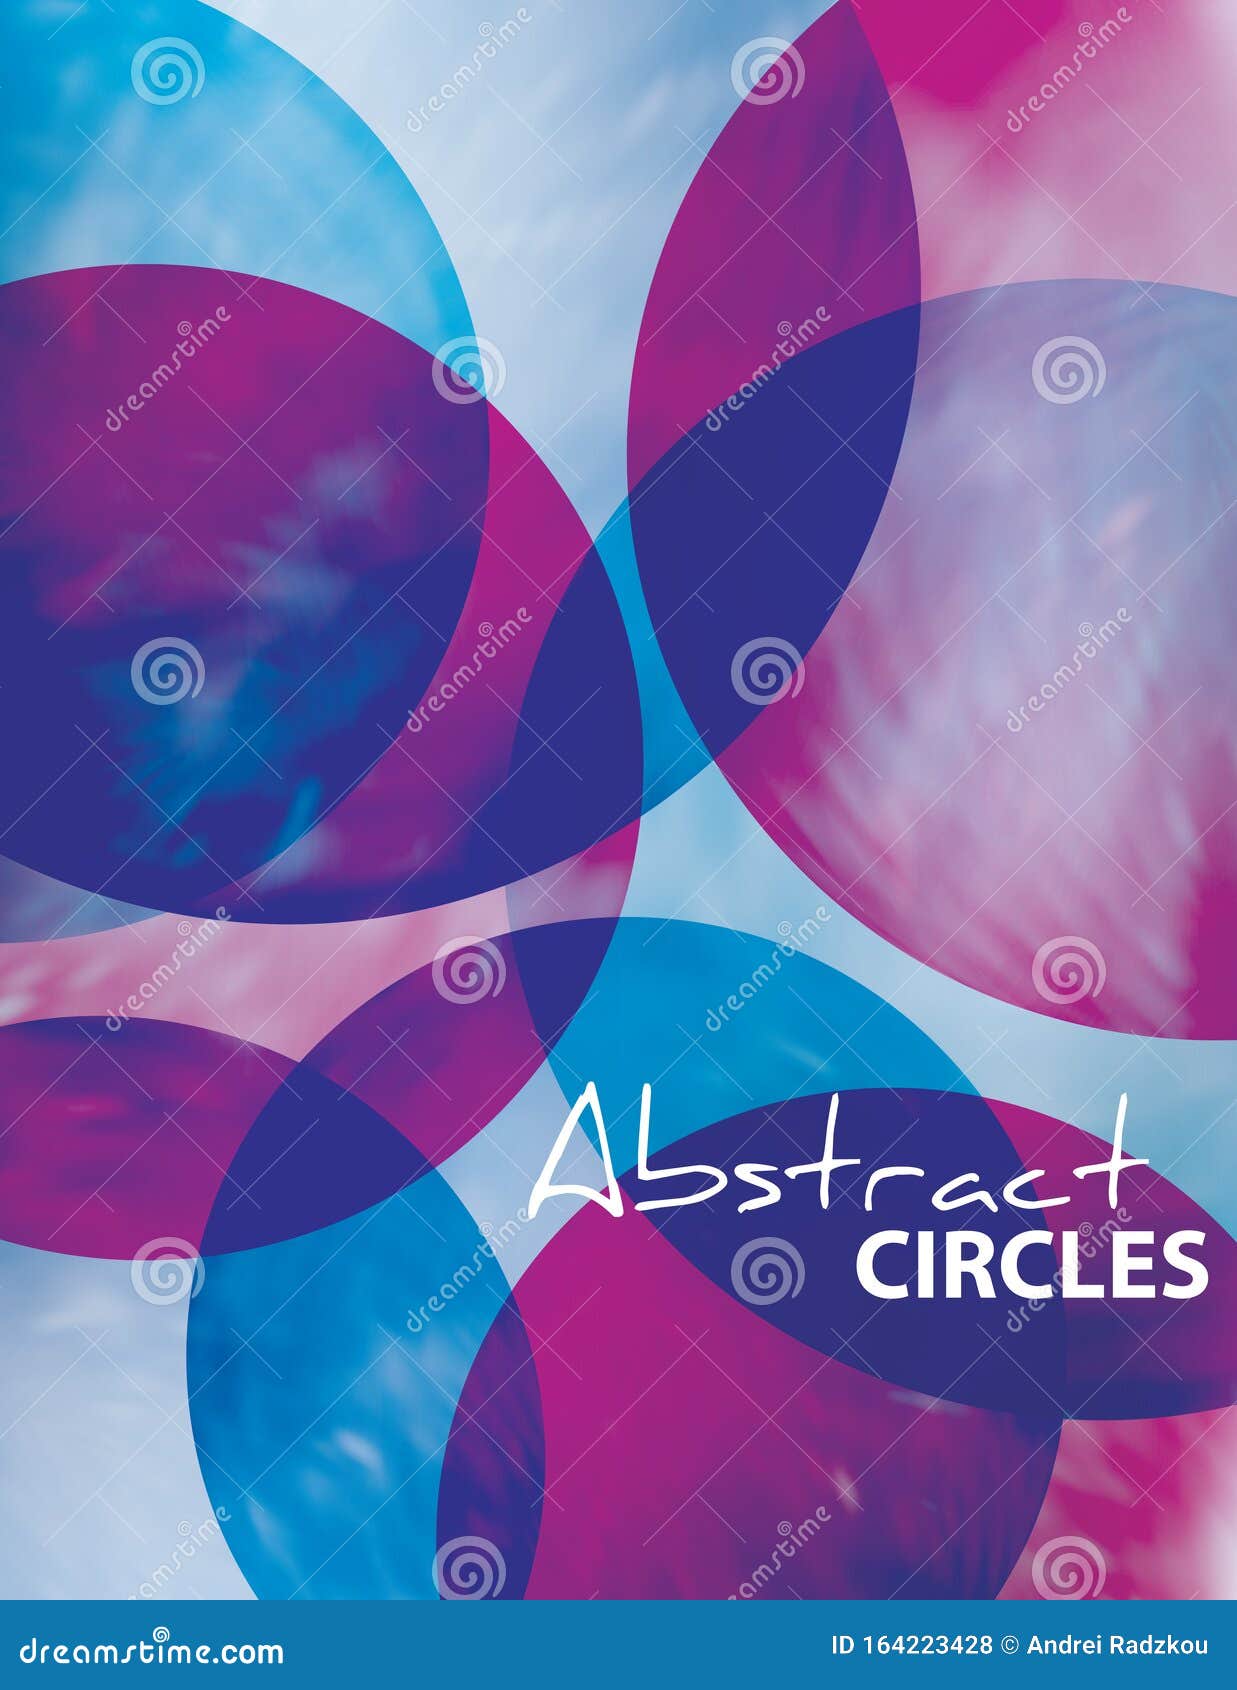 abstract circles. poster in cerulean and dark purple colors. 